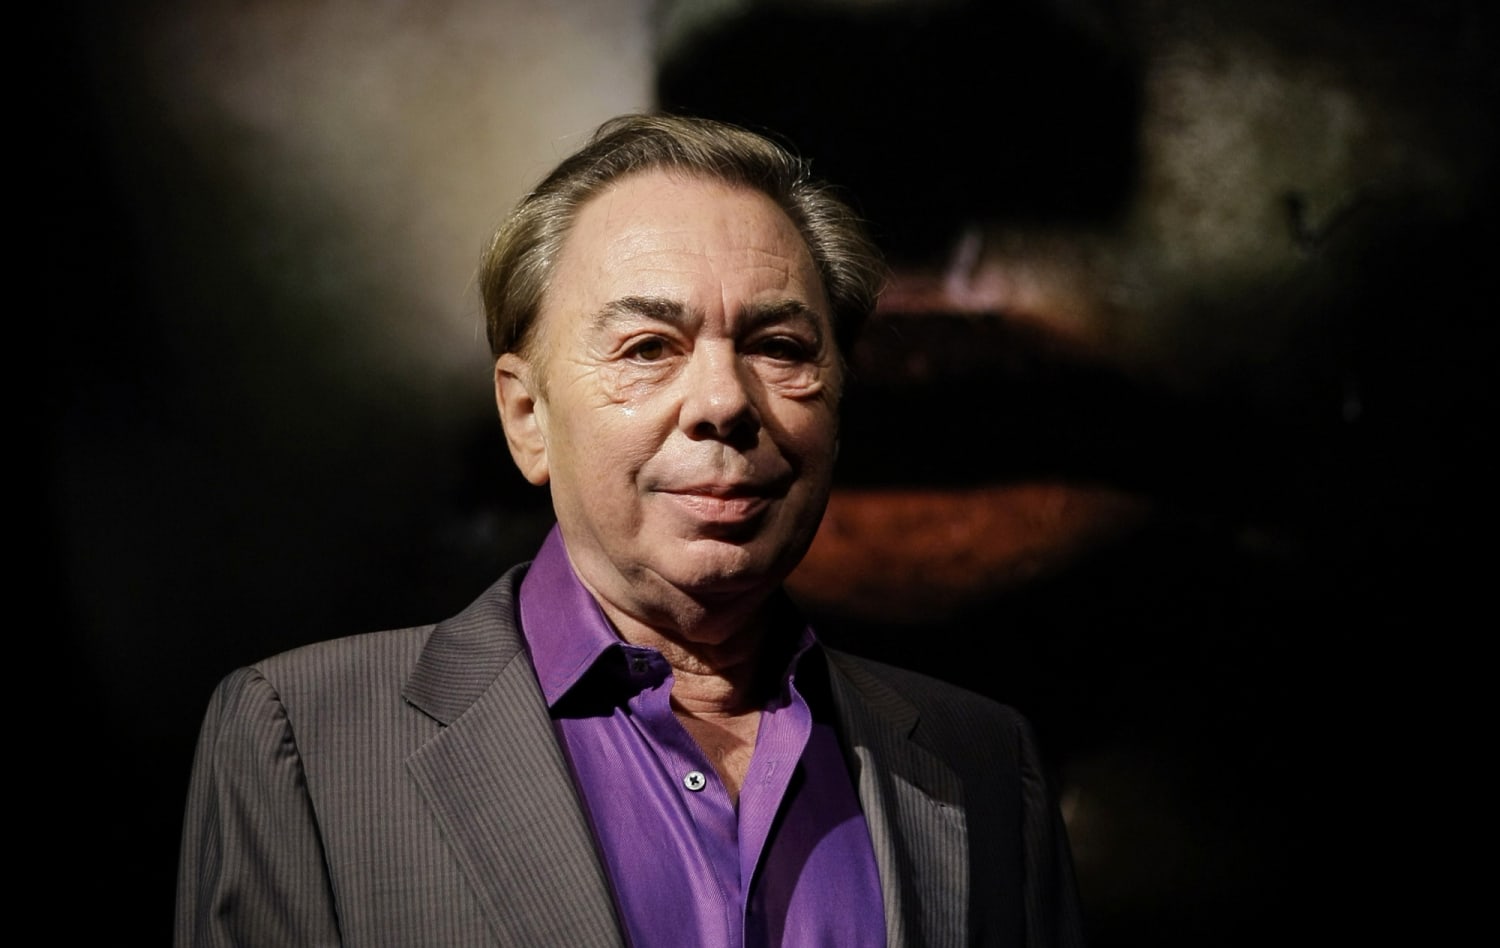 Andrew Lloyd Webber reveals his eldest son is critically ill with stomach cancer